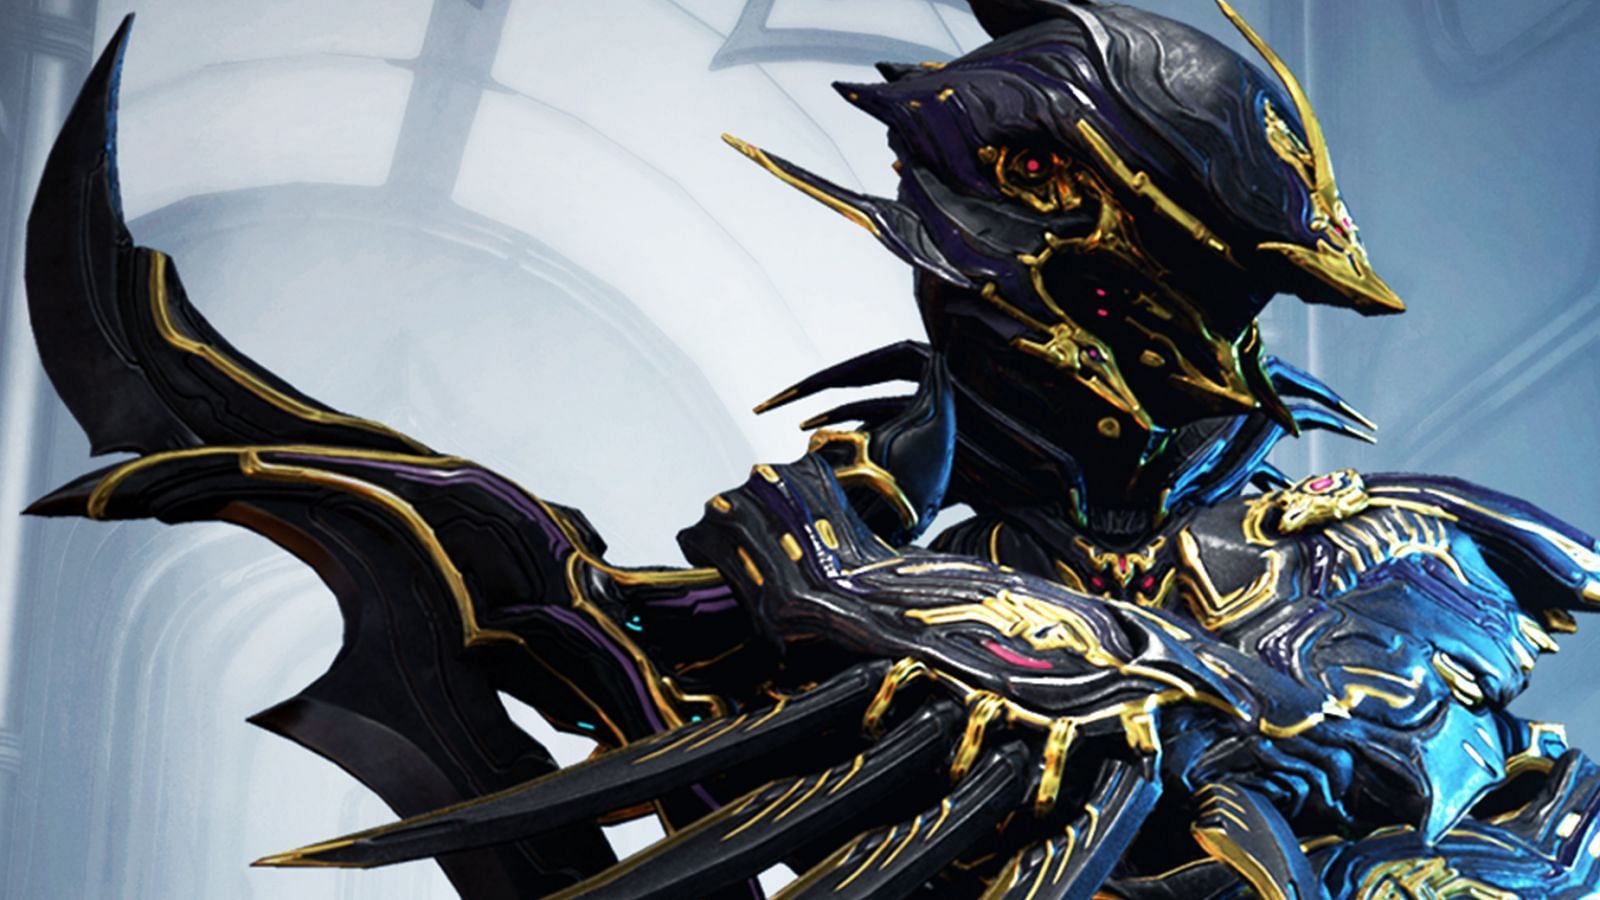 Zephyr Prime was released in 2018 (Image via Digital Extremes)